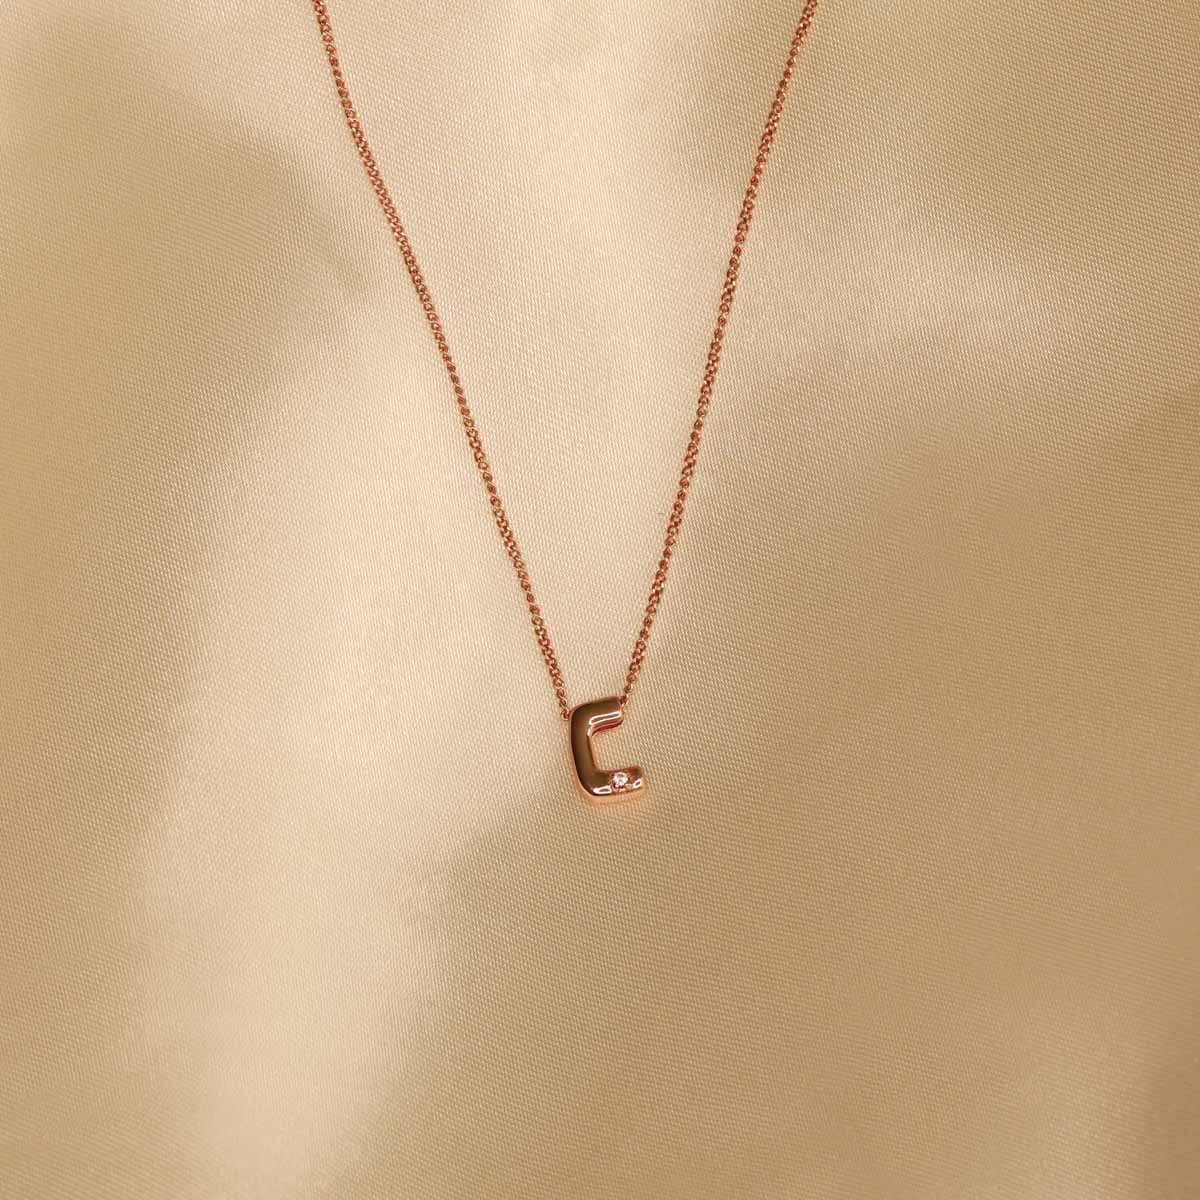 Flat lay shot of C Initial Pendant Necklace in Rose Gold